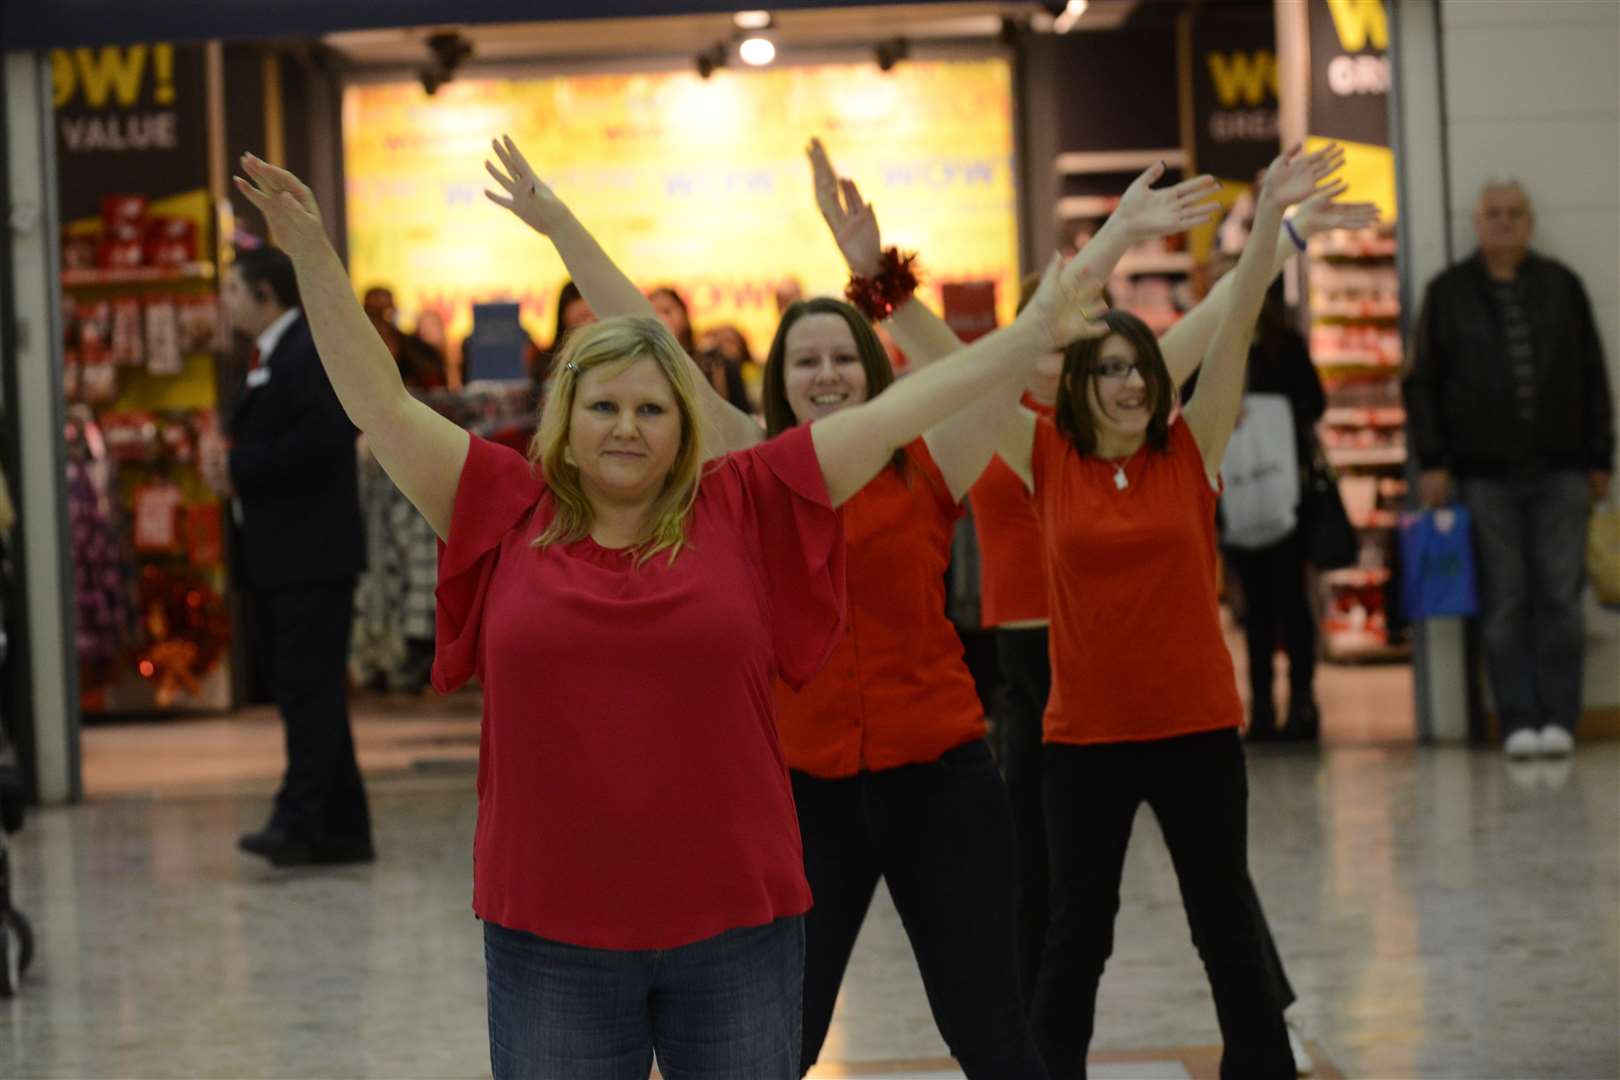 Flashmob dance in aid of Ruby Pentagon Centre, Chatham